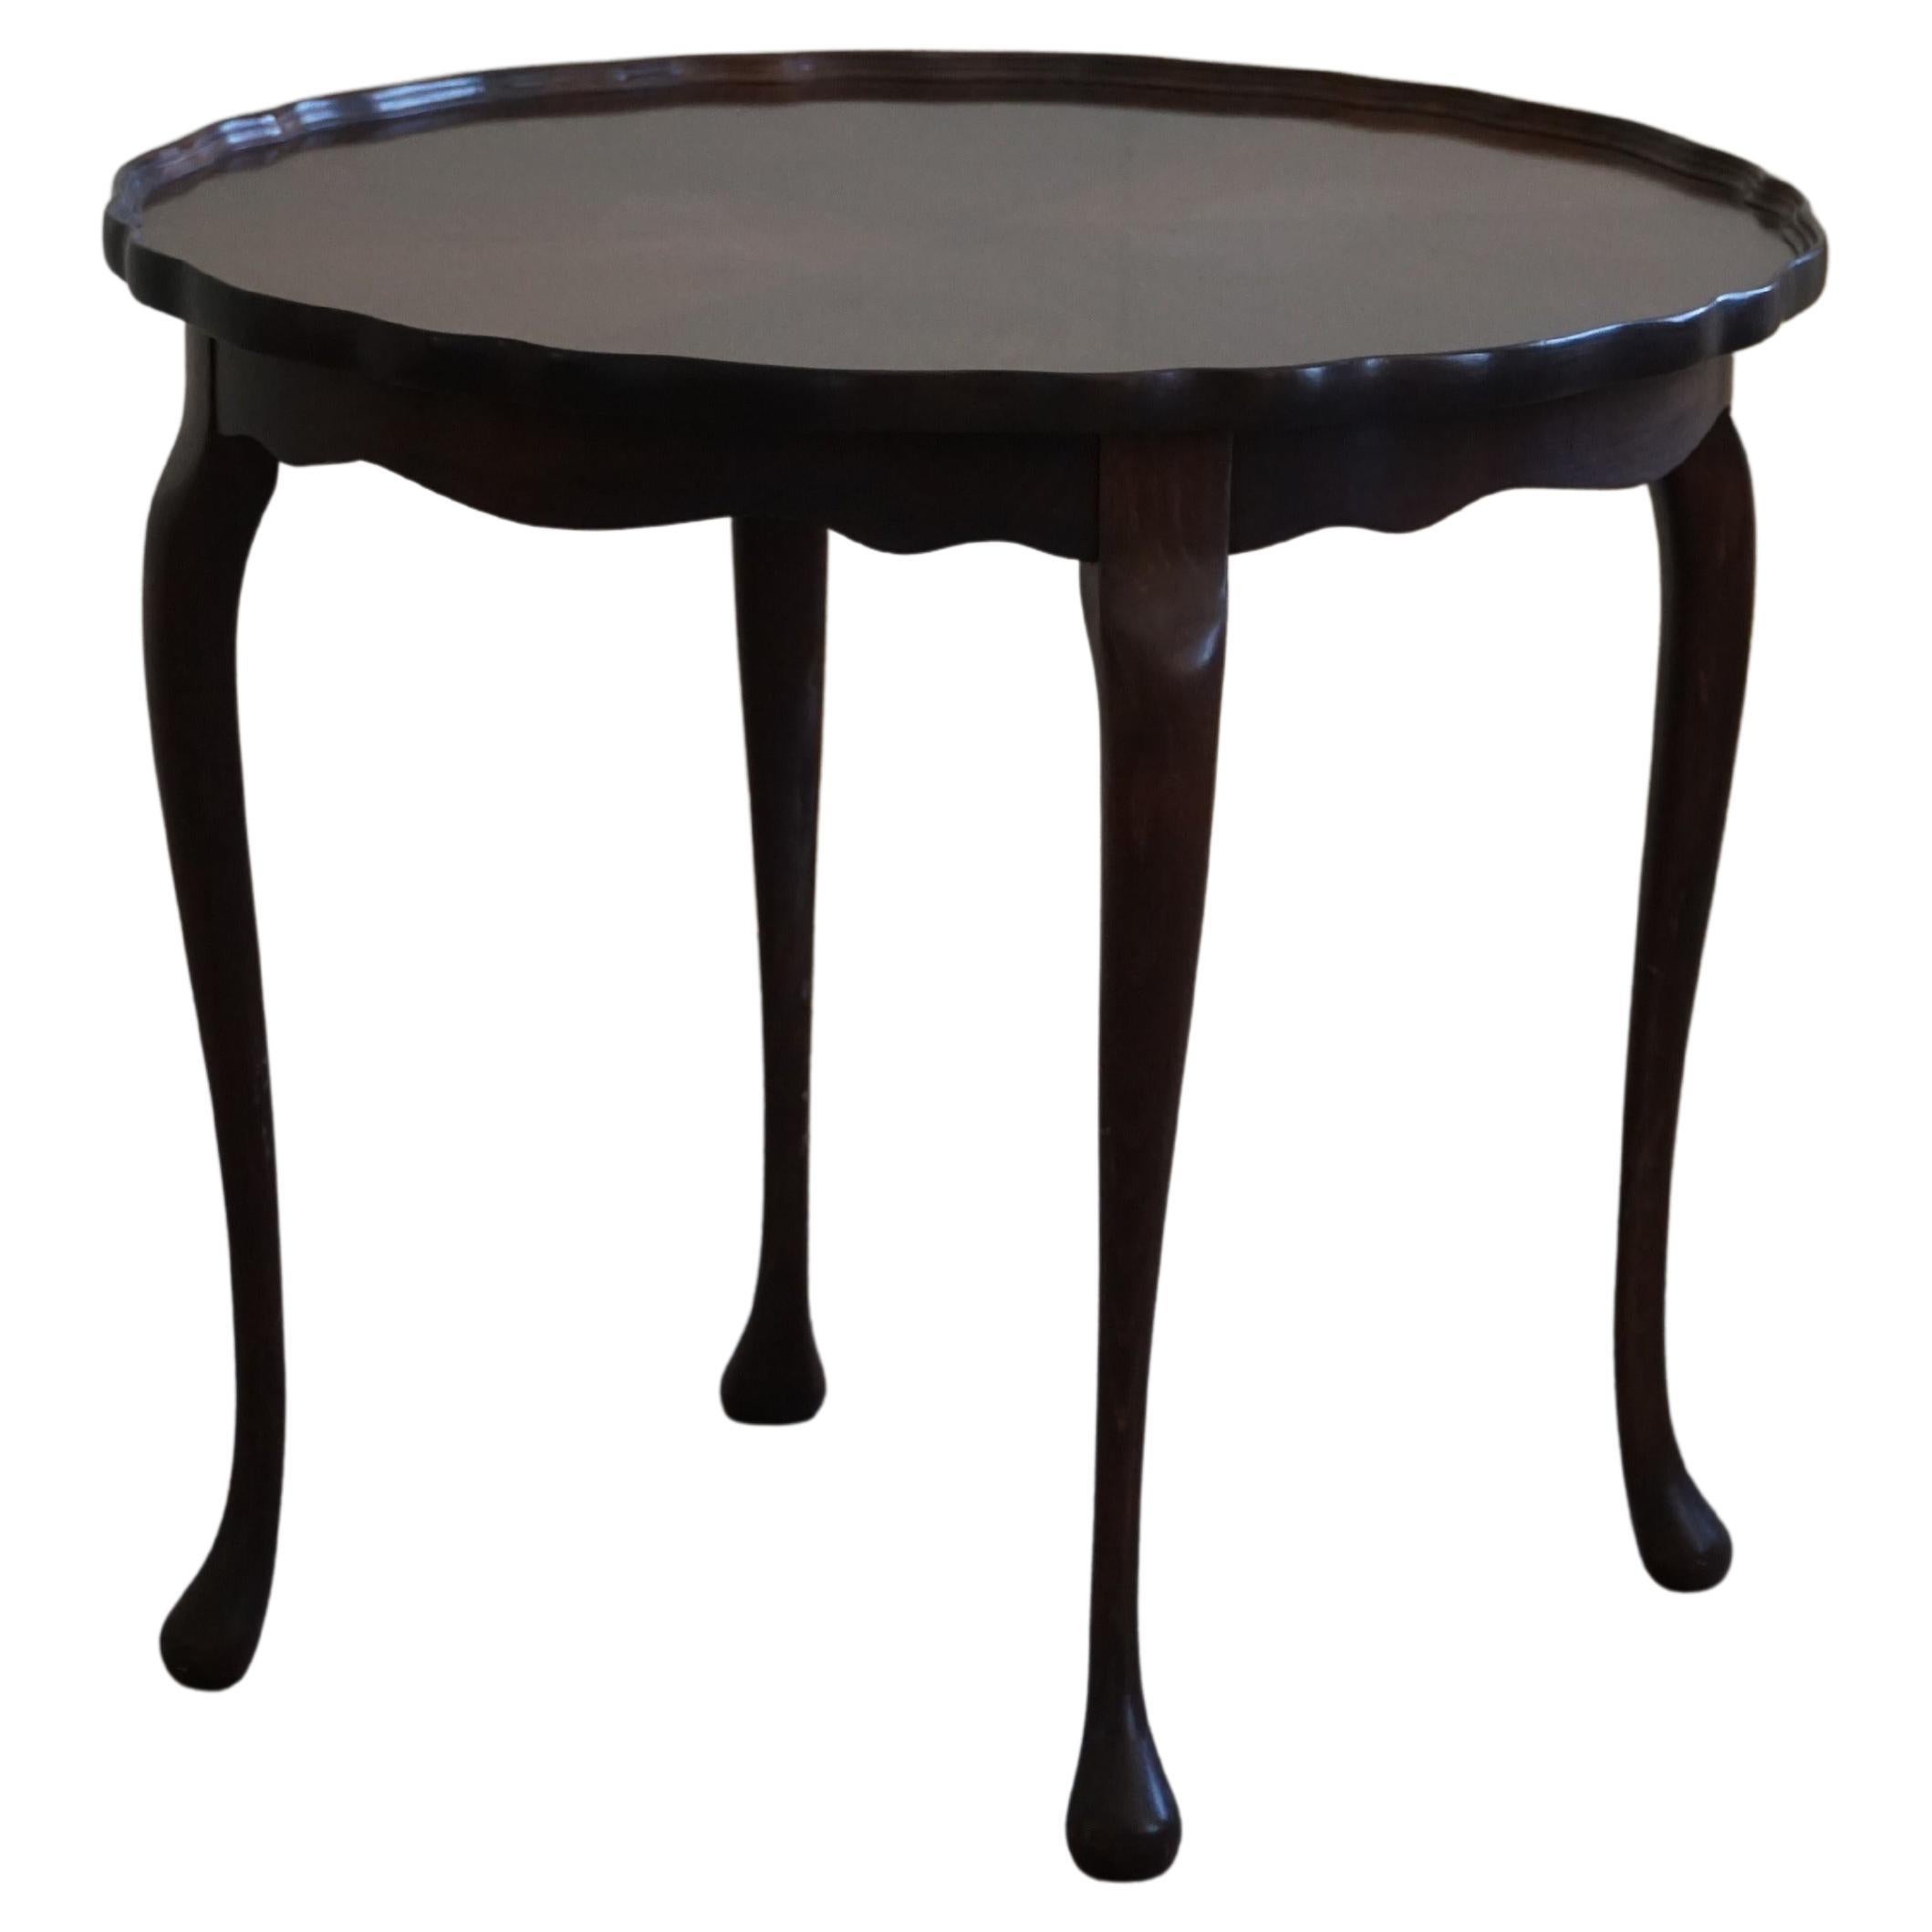 Danish Art Deco Side Table / Coffee Table in Stained Beech, 1940s